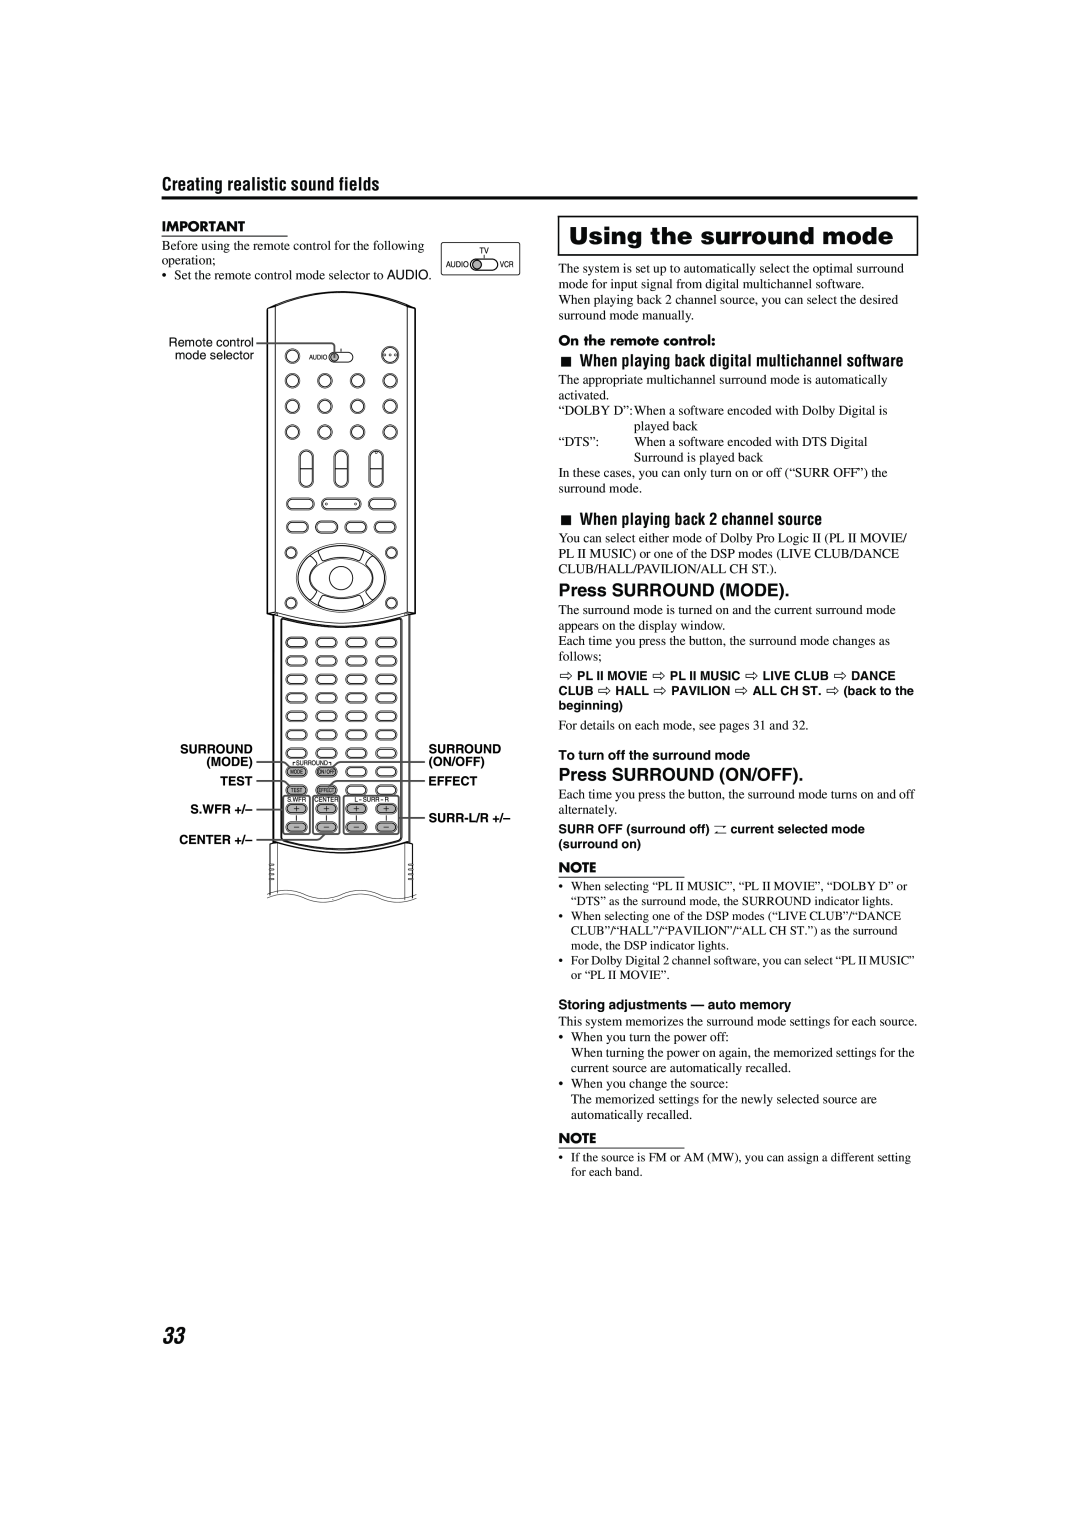 JVC M45 manual Using the surround mode, Press SURROUND MODE, Press SURROUND ON/OFF, 7When playing back 2 channel source 